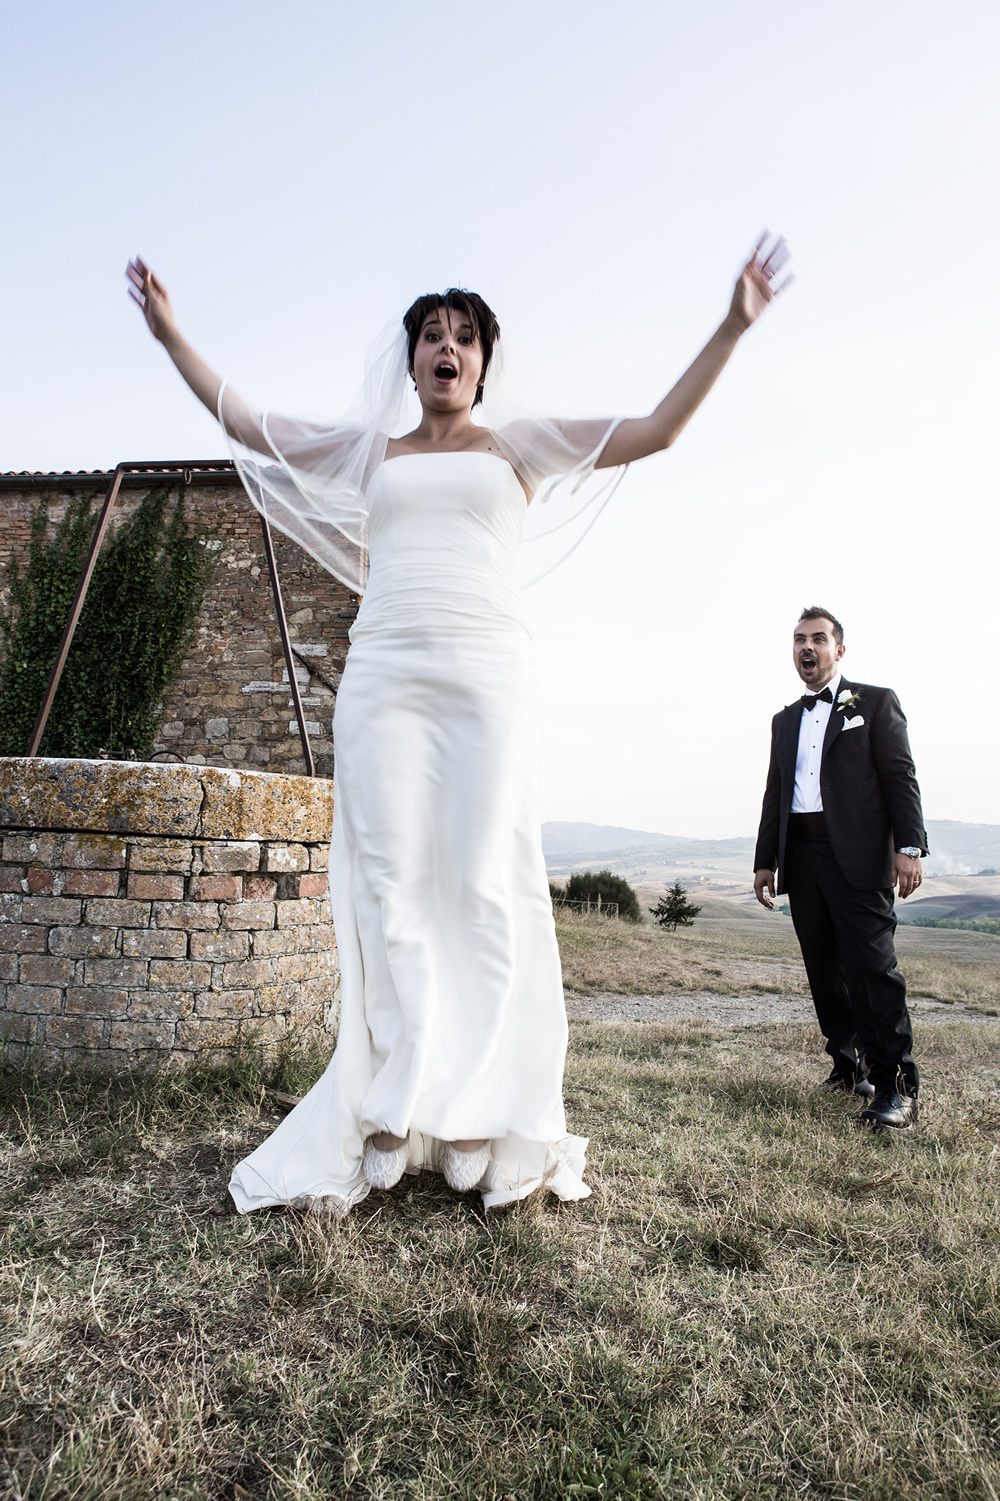 Your wedding planners in Tuscany